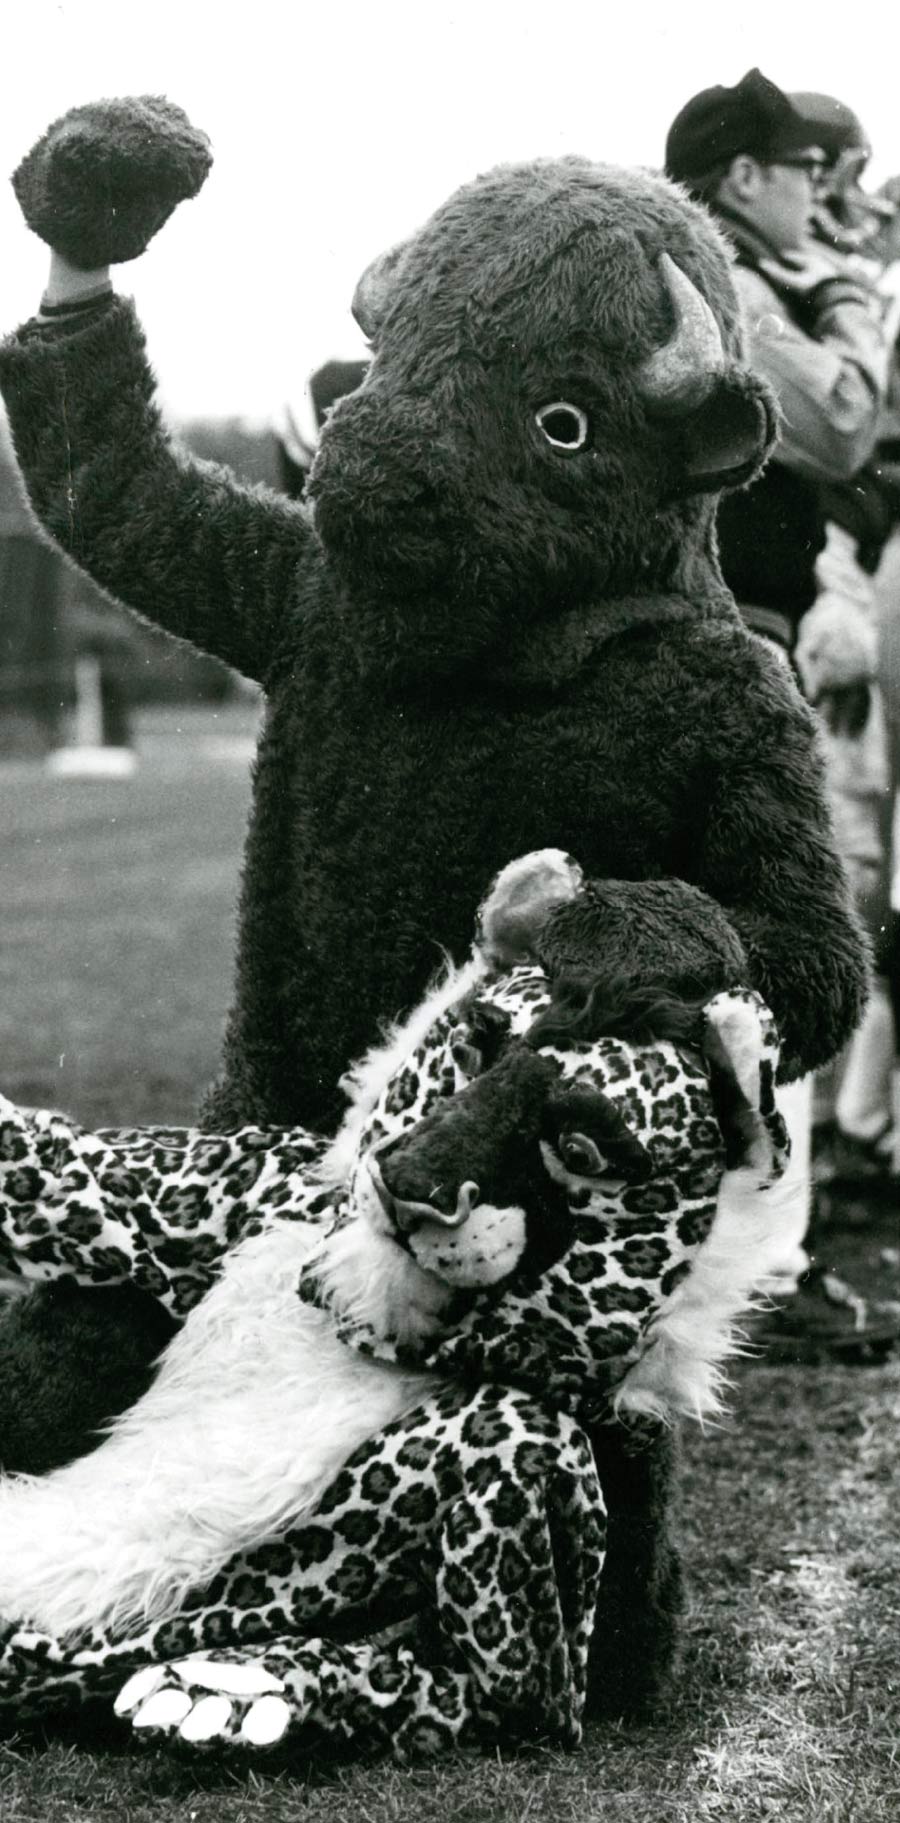 Bucky trounces his opponent in this undated photo.